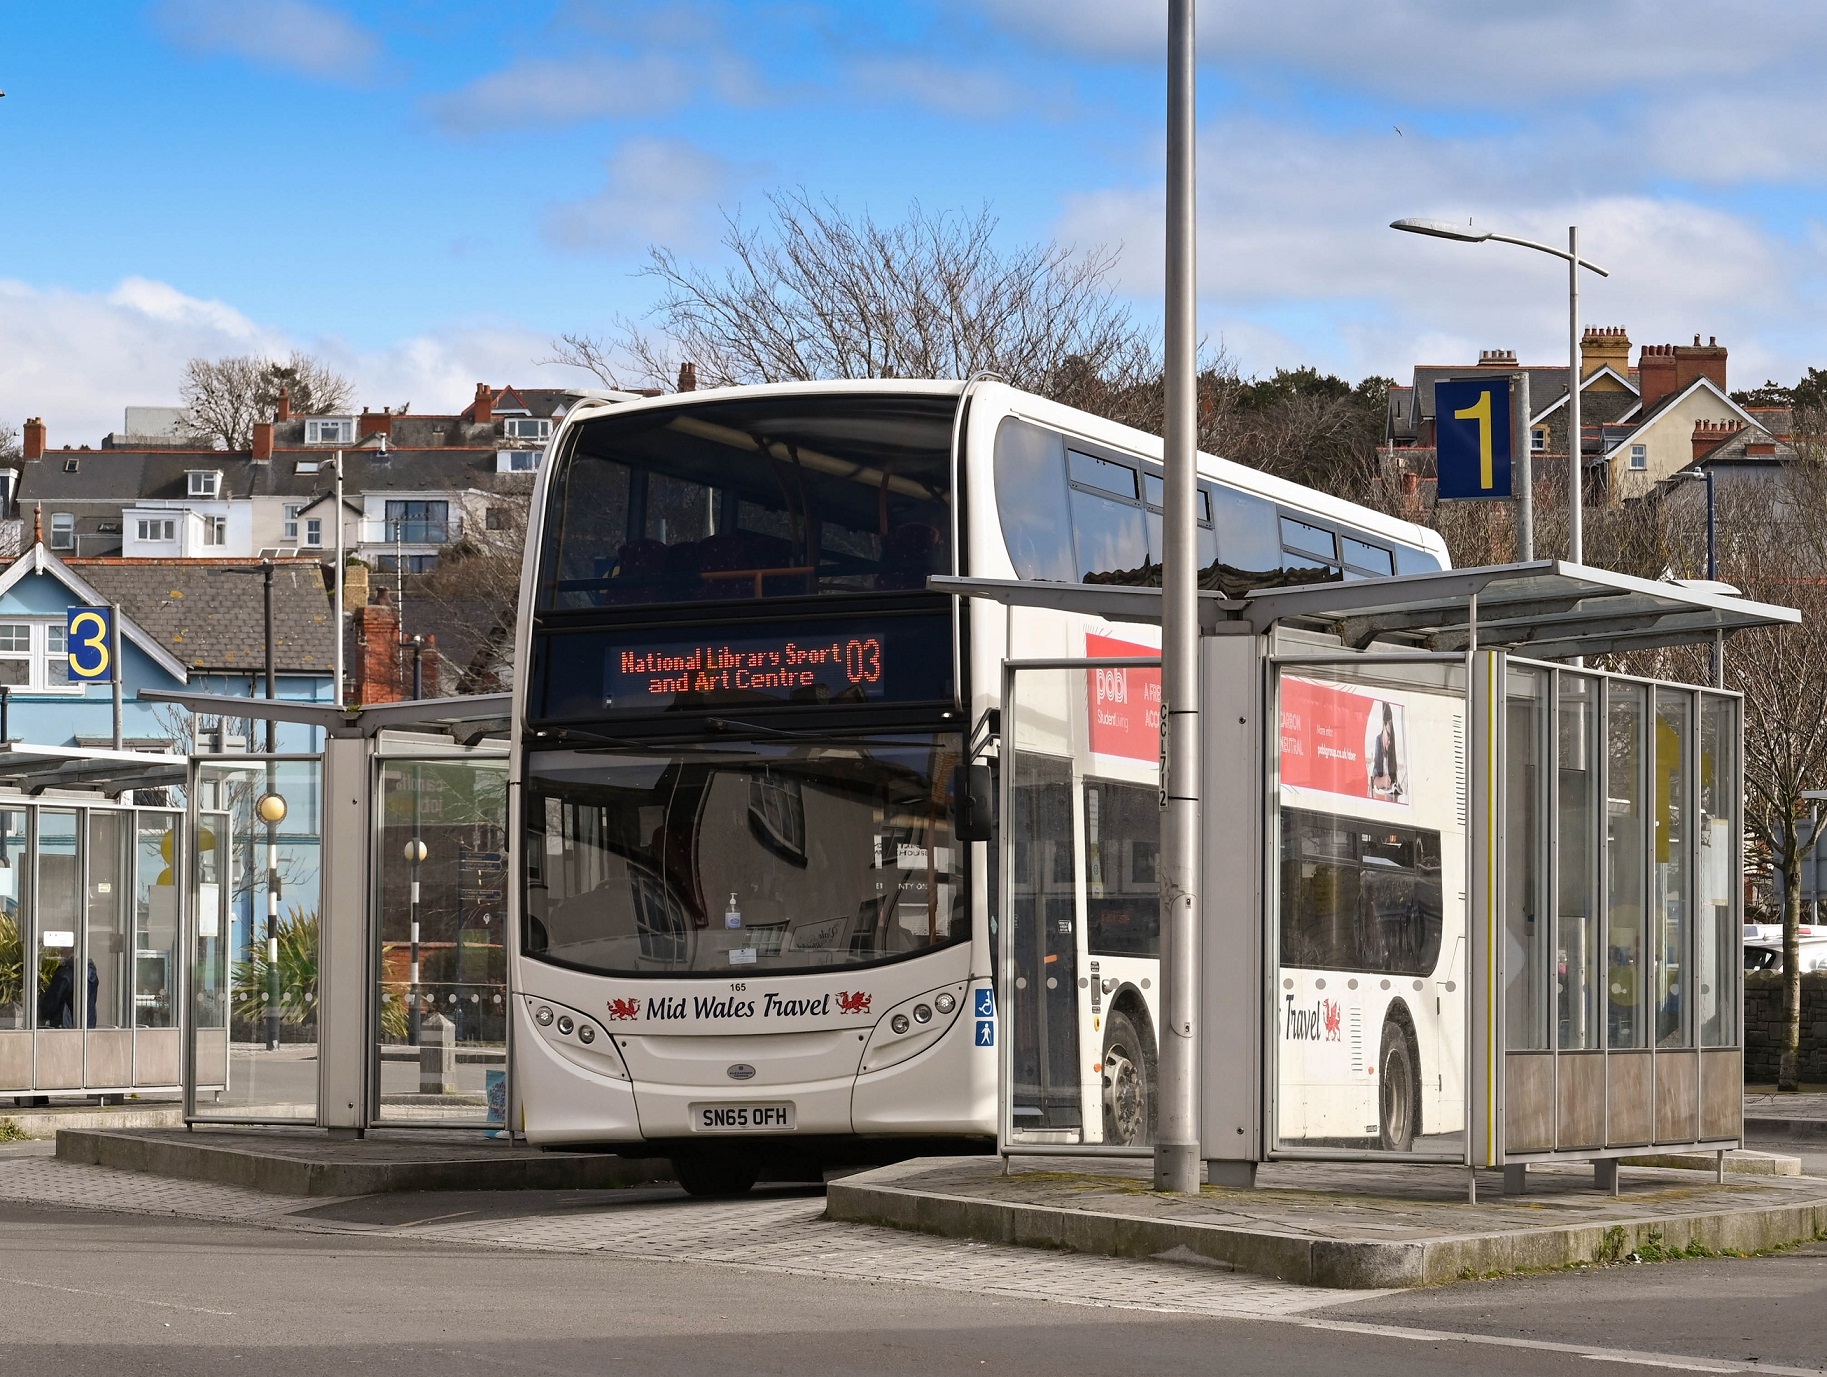 Bus Emergency Scheme in Wales gets three month extension